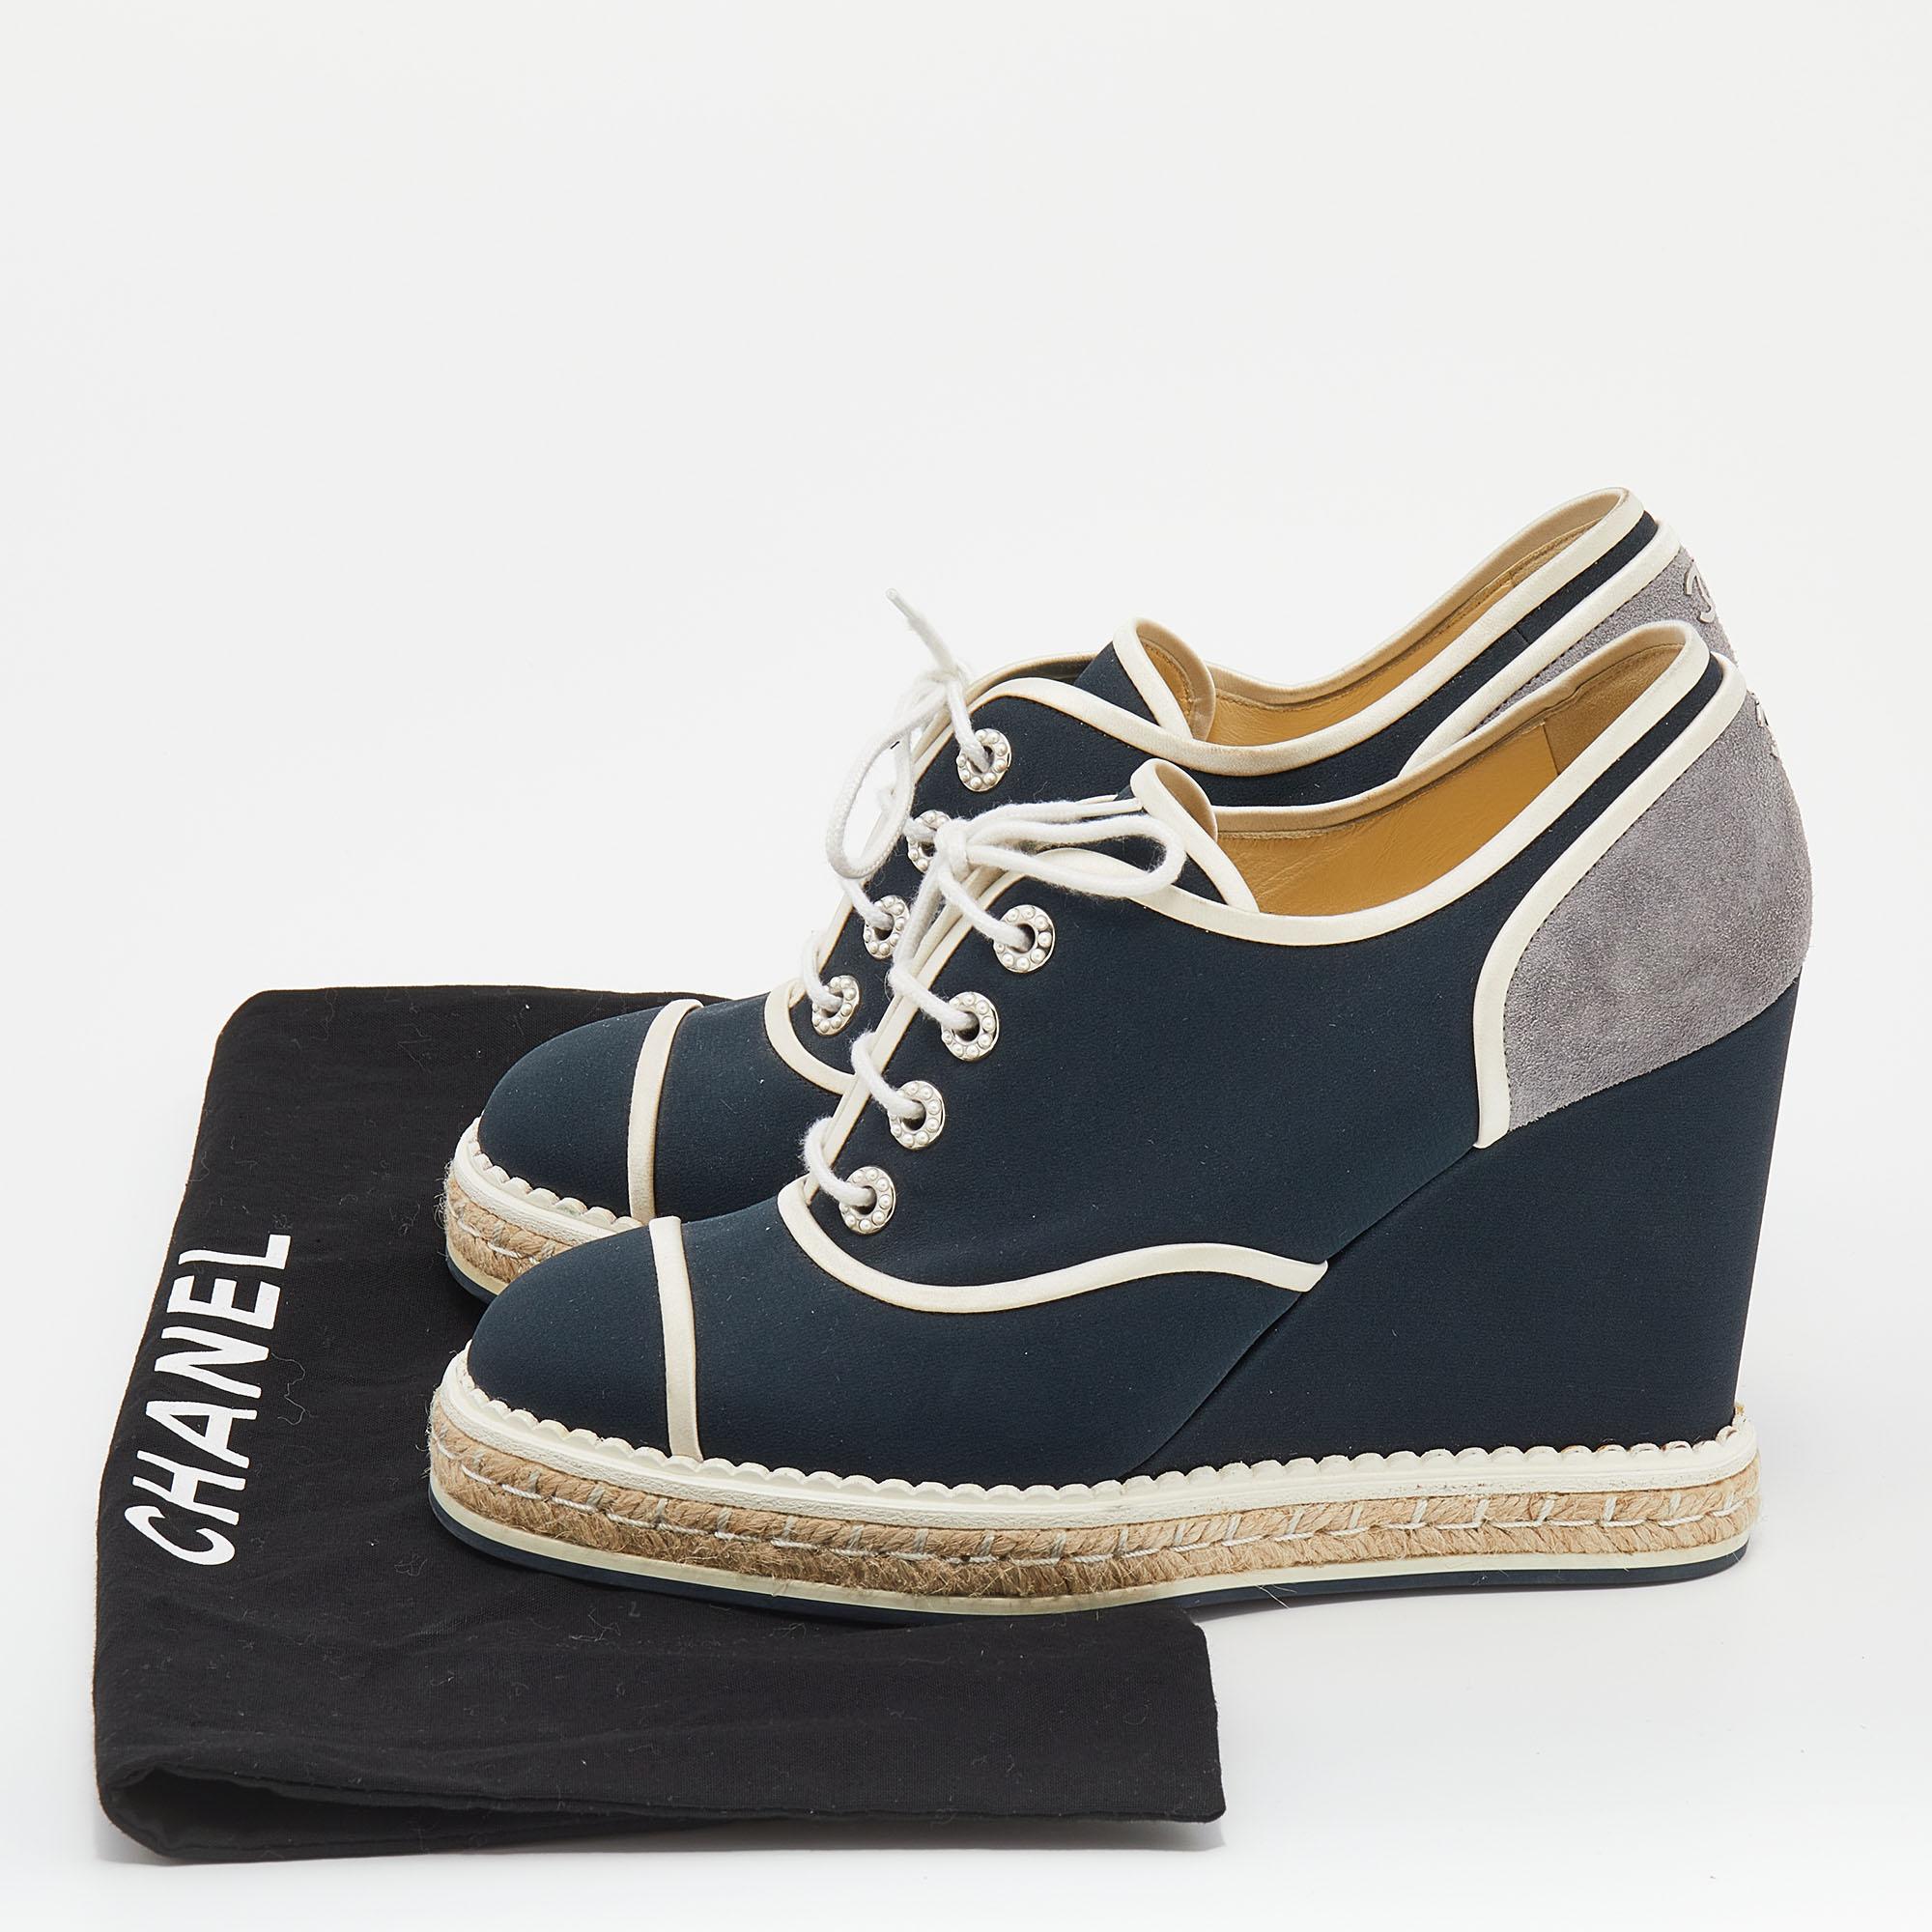 Chanel Navy Blue/Grey Fabric and Suede CC Wedge Sneakers Size 39.5 2